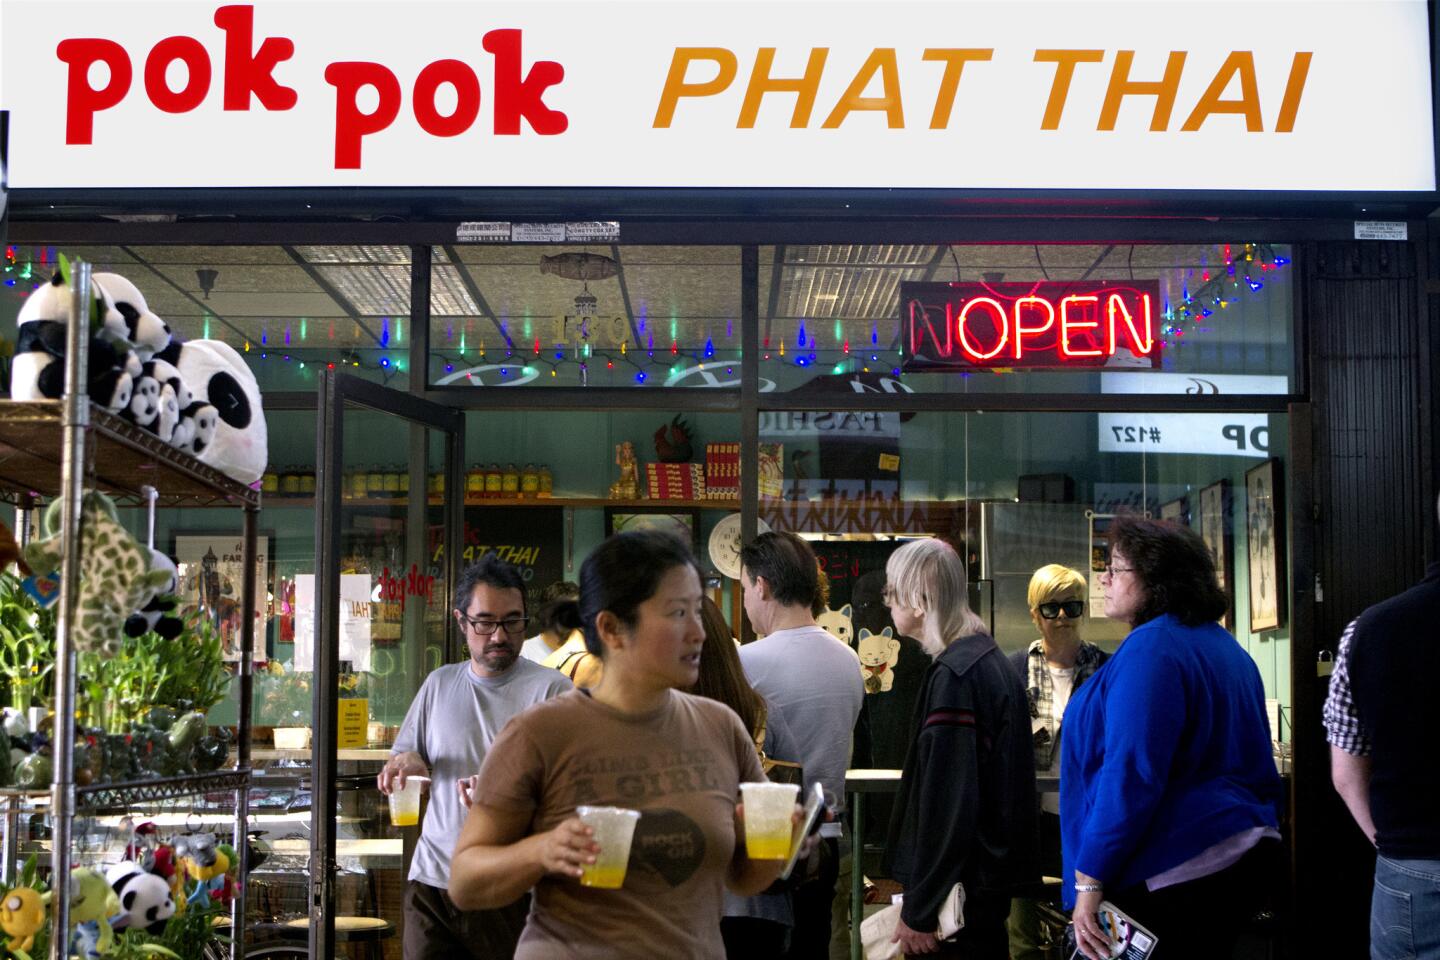 Eddy Minn, from left, and Yvonne Lau find a seat outside while customers wait in line to order lunch at Pok Pok Phat Thai in Chinatown.